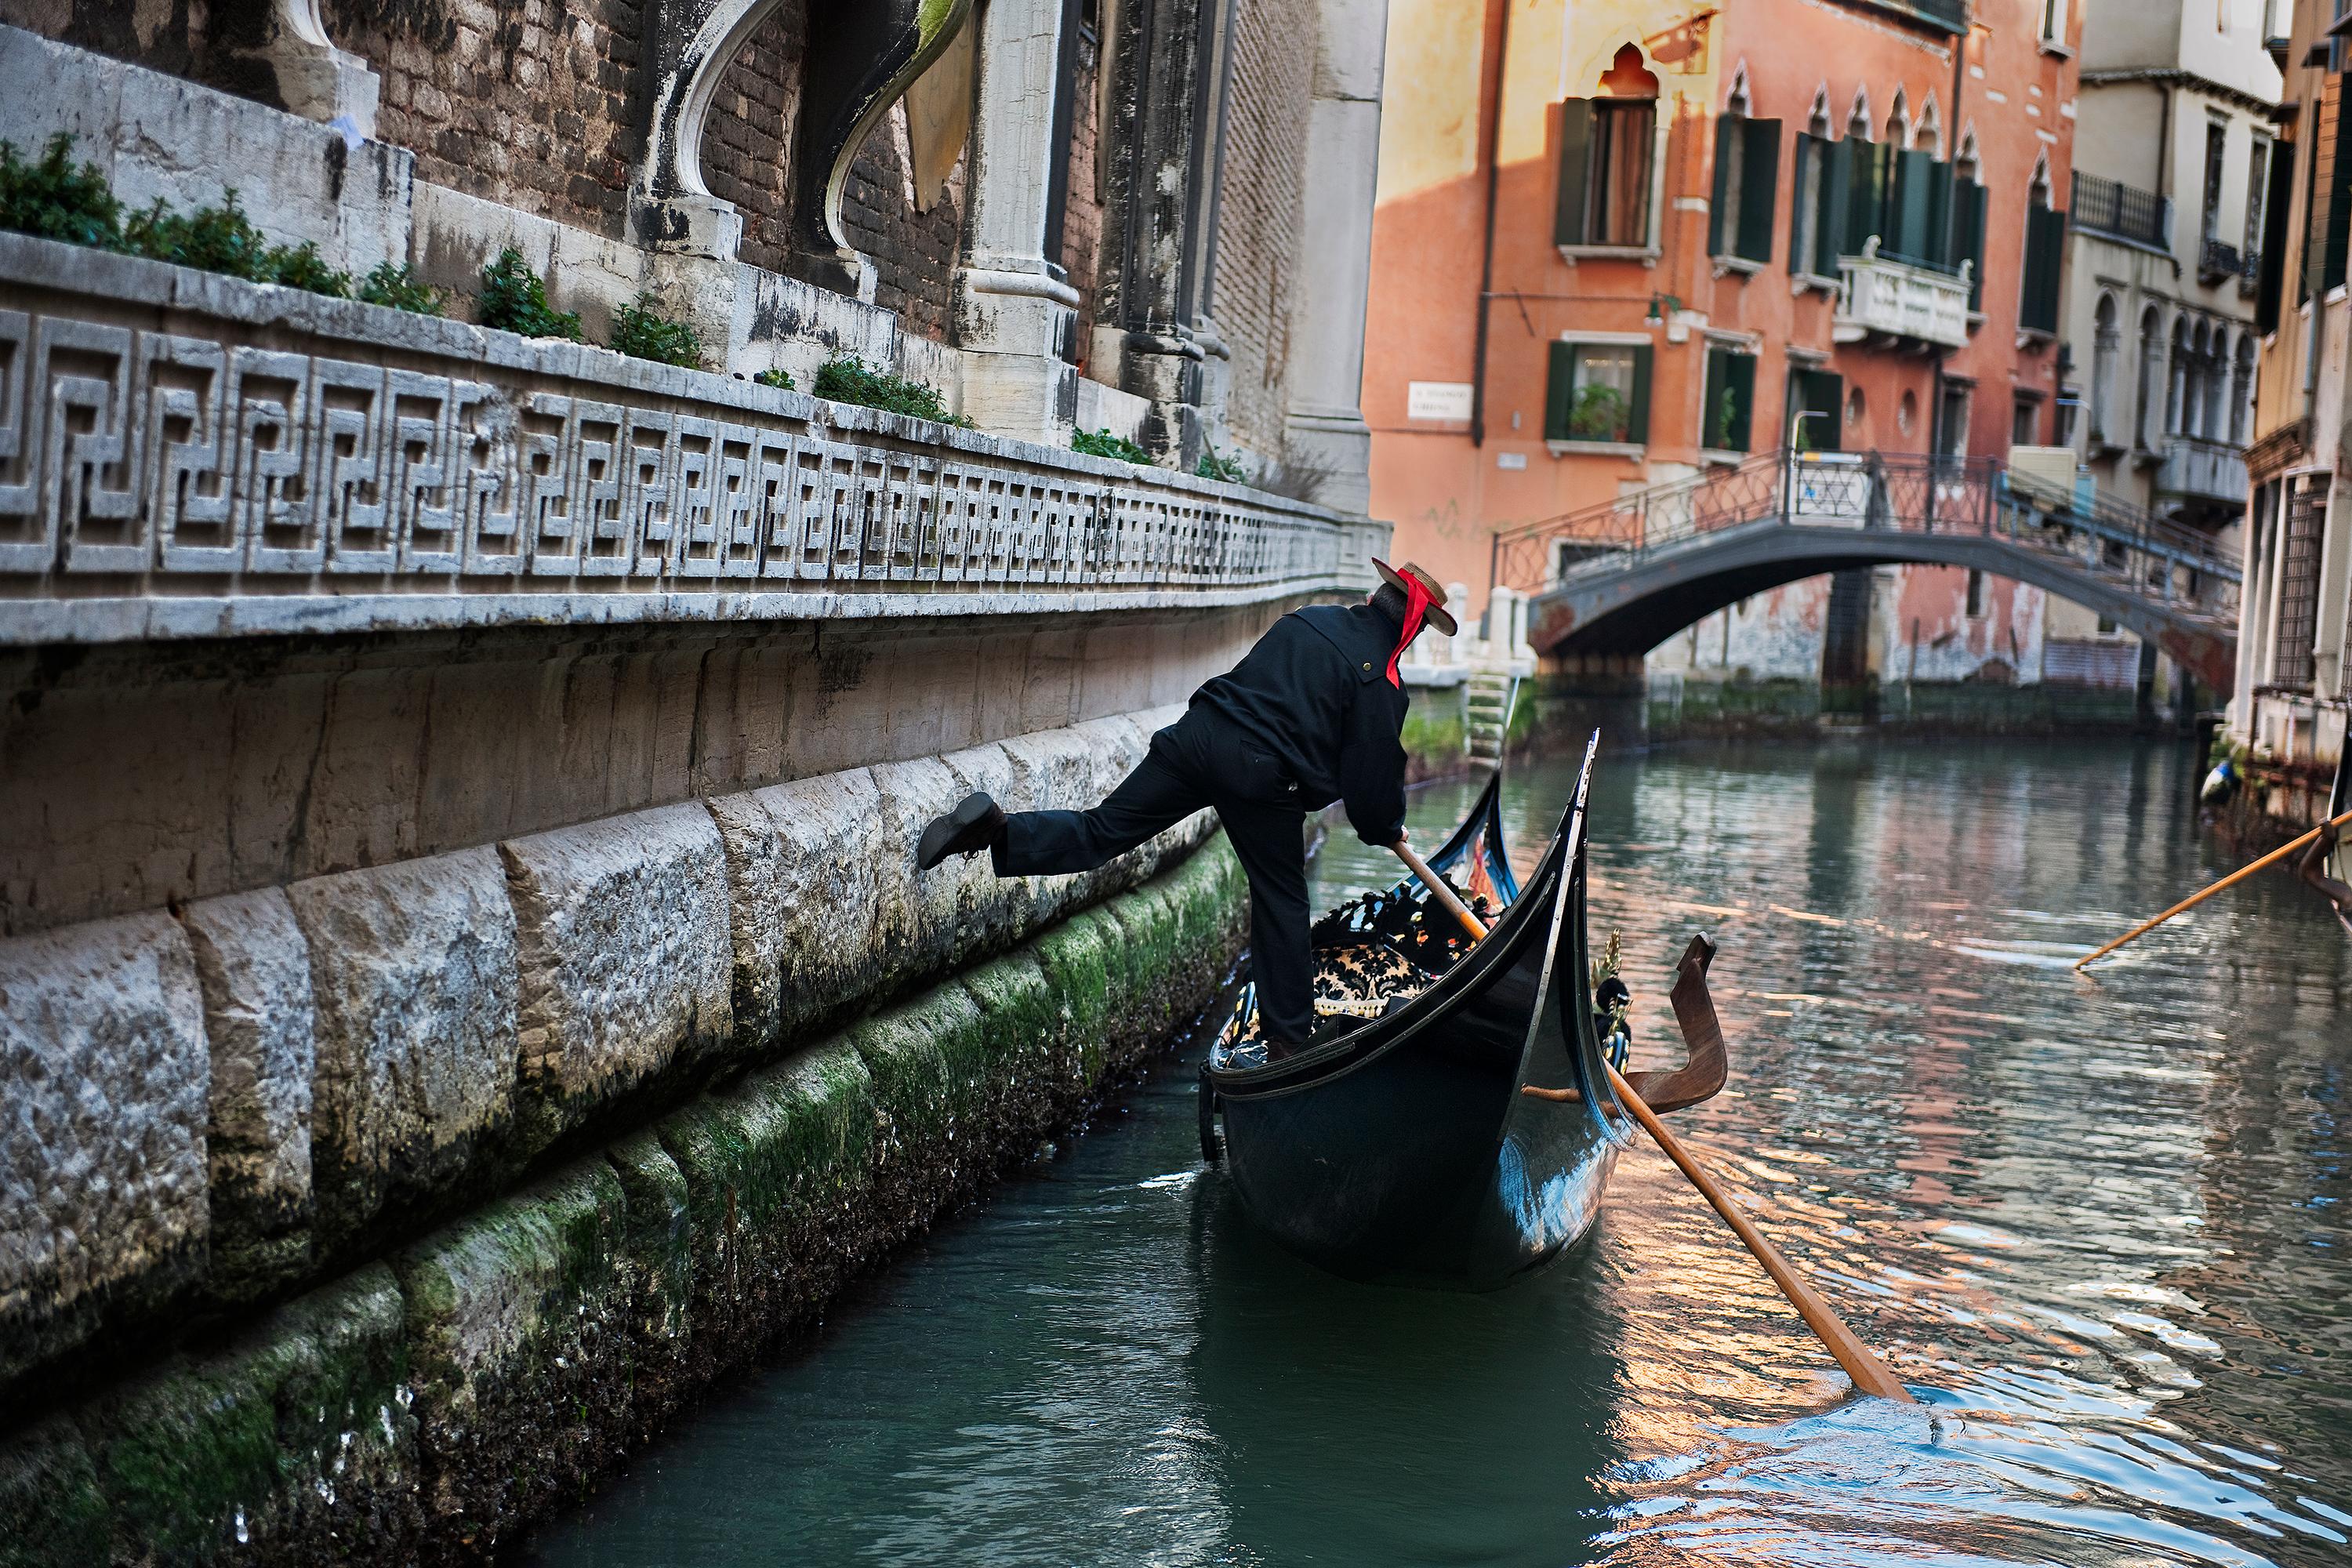 Gondolier on Canal  - Photograph by Steve McCurry